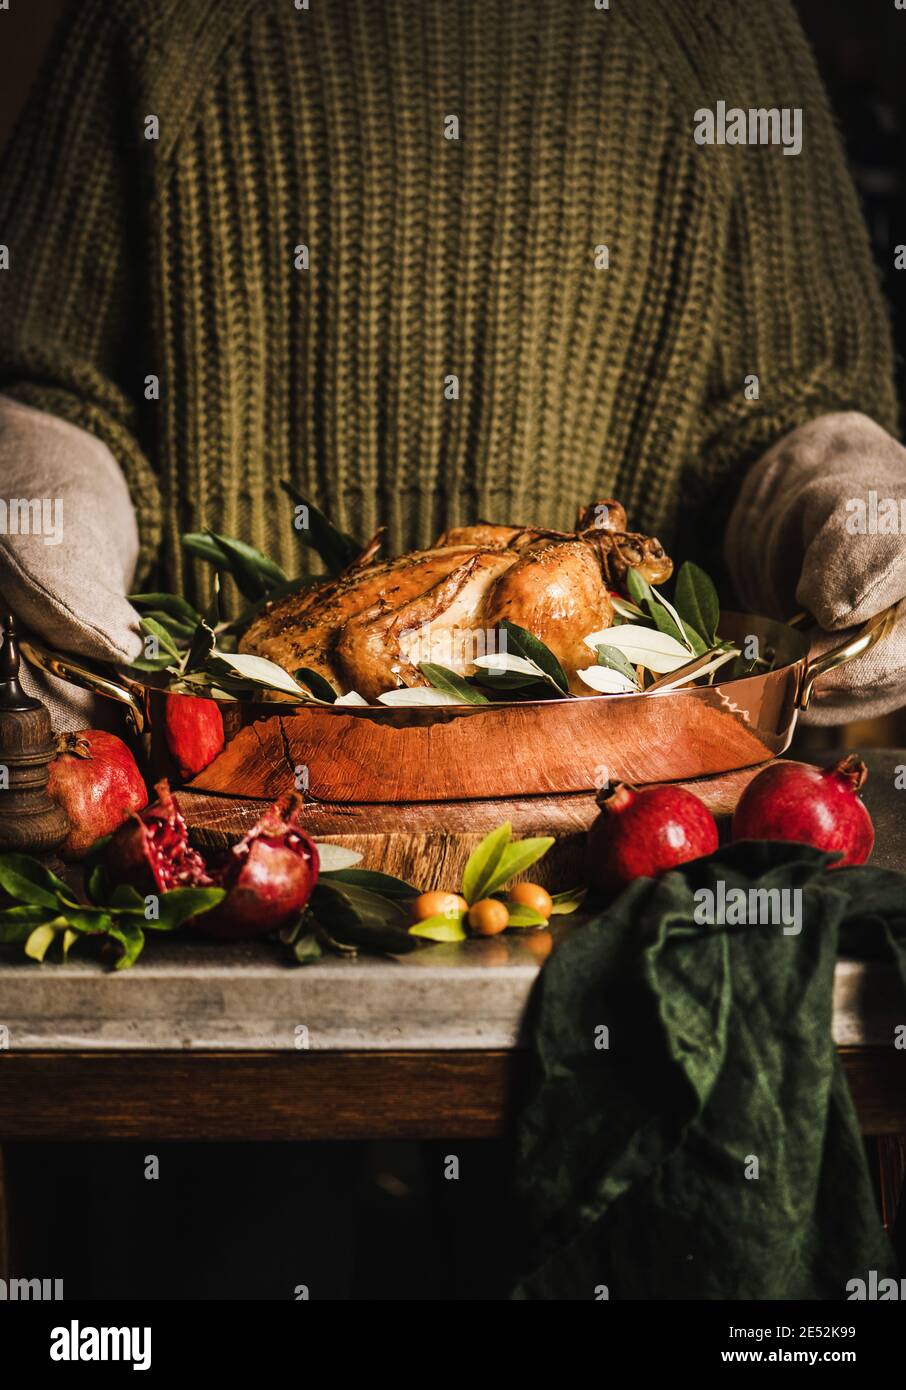 Woman in knitted sweater and kitchen mittens holding whole roasted chicken for holiday festive dinner in copper roasting tin with spices, herbs and fruit. Christmas or Thanksgiving Day cooking concept Stock Photo